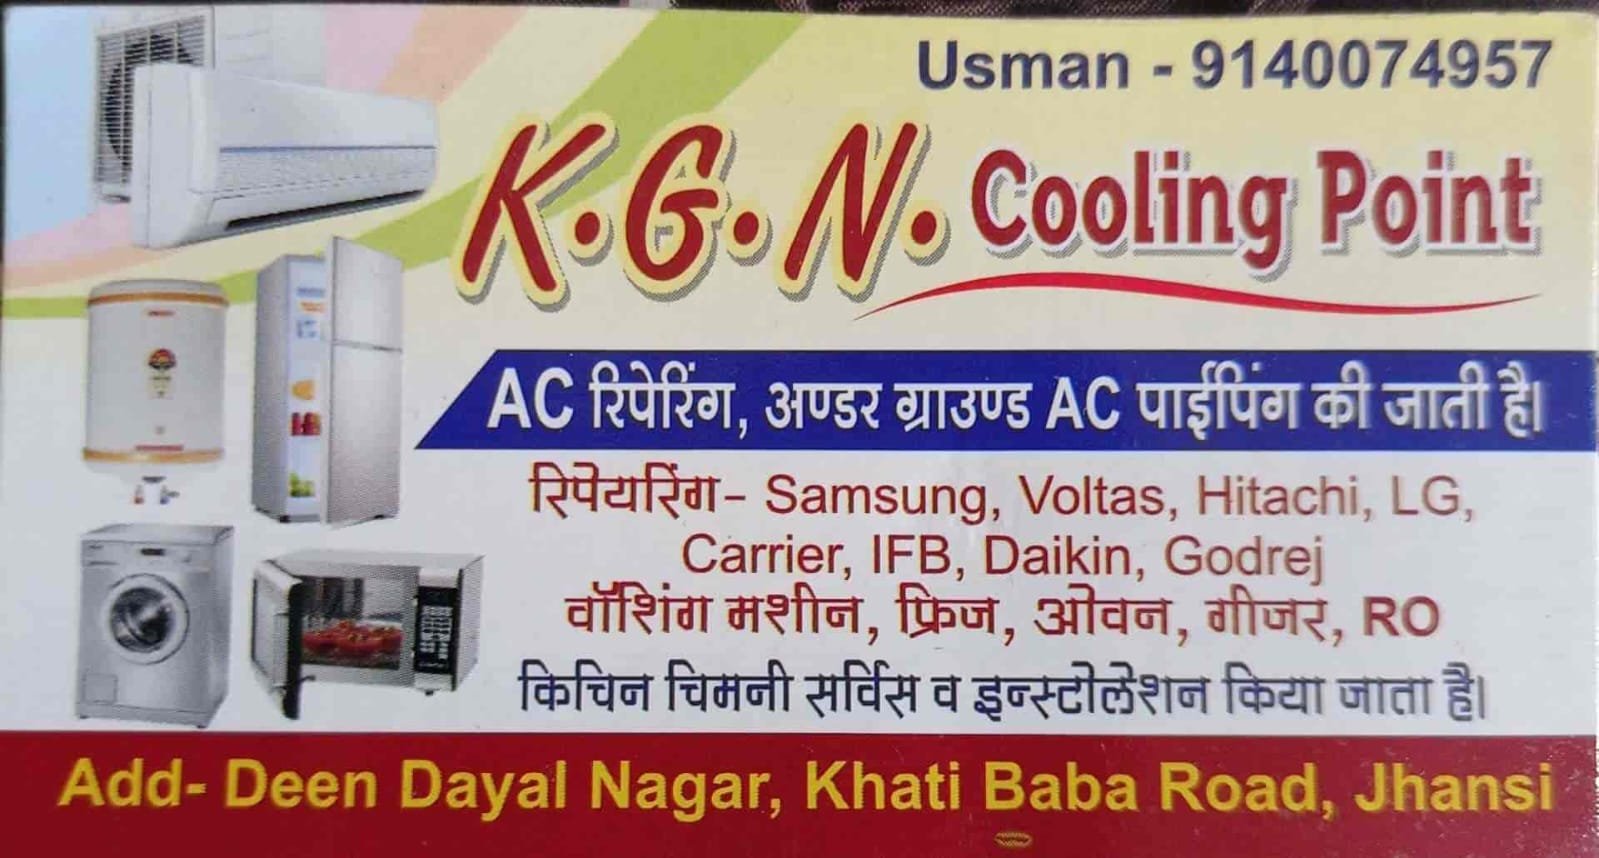 KGN Cooling point